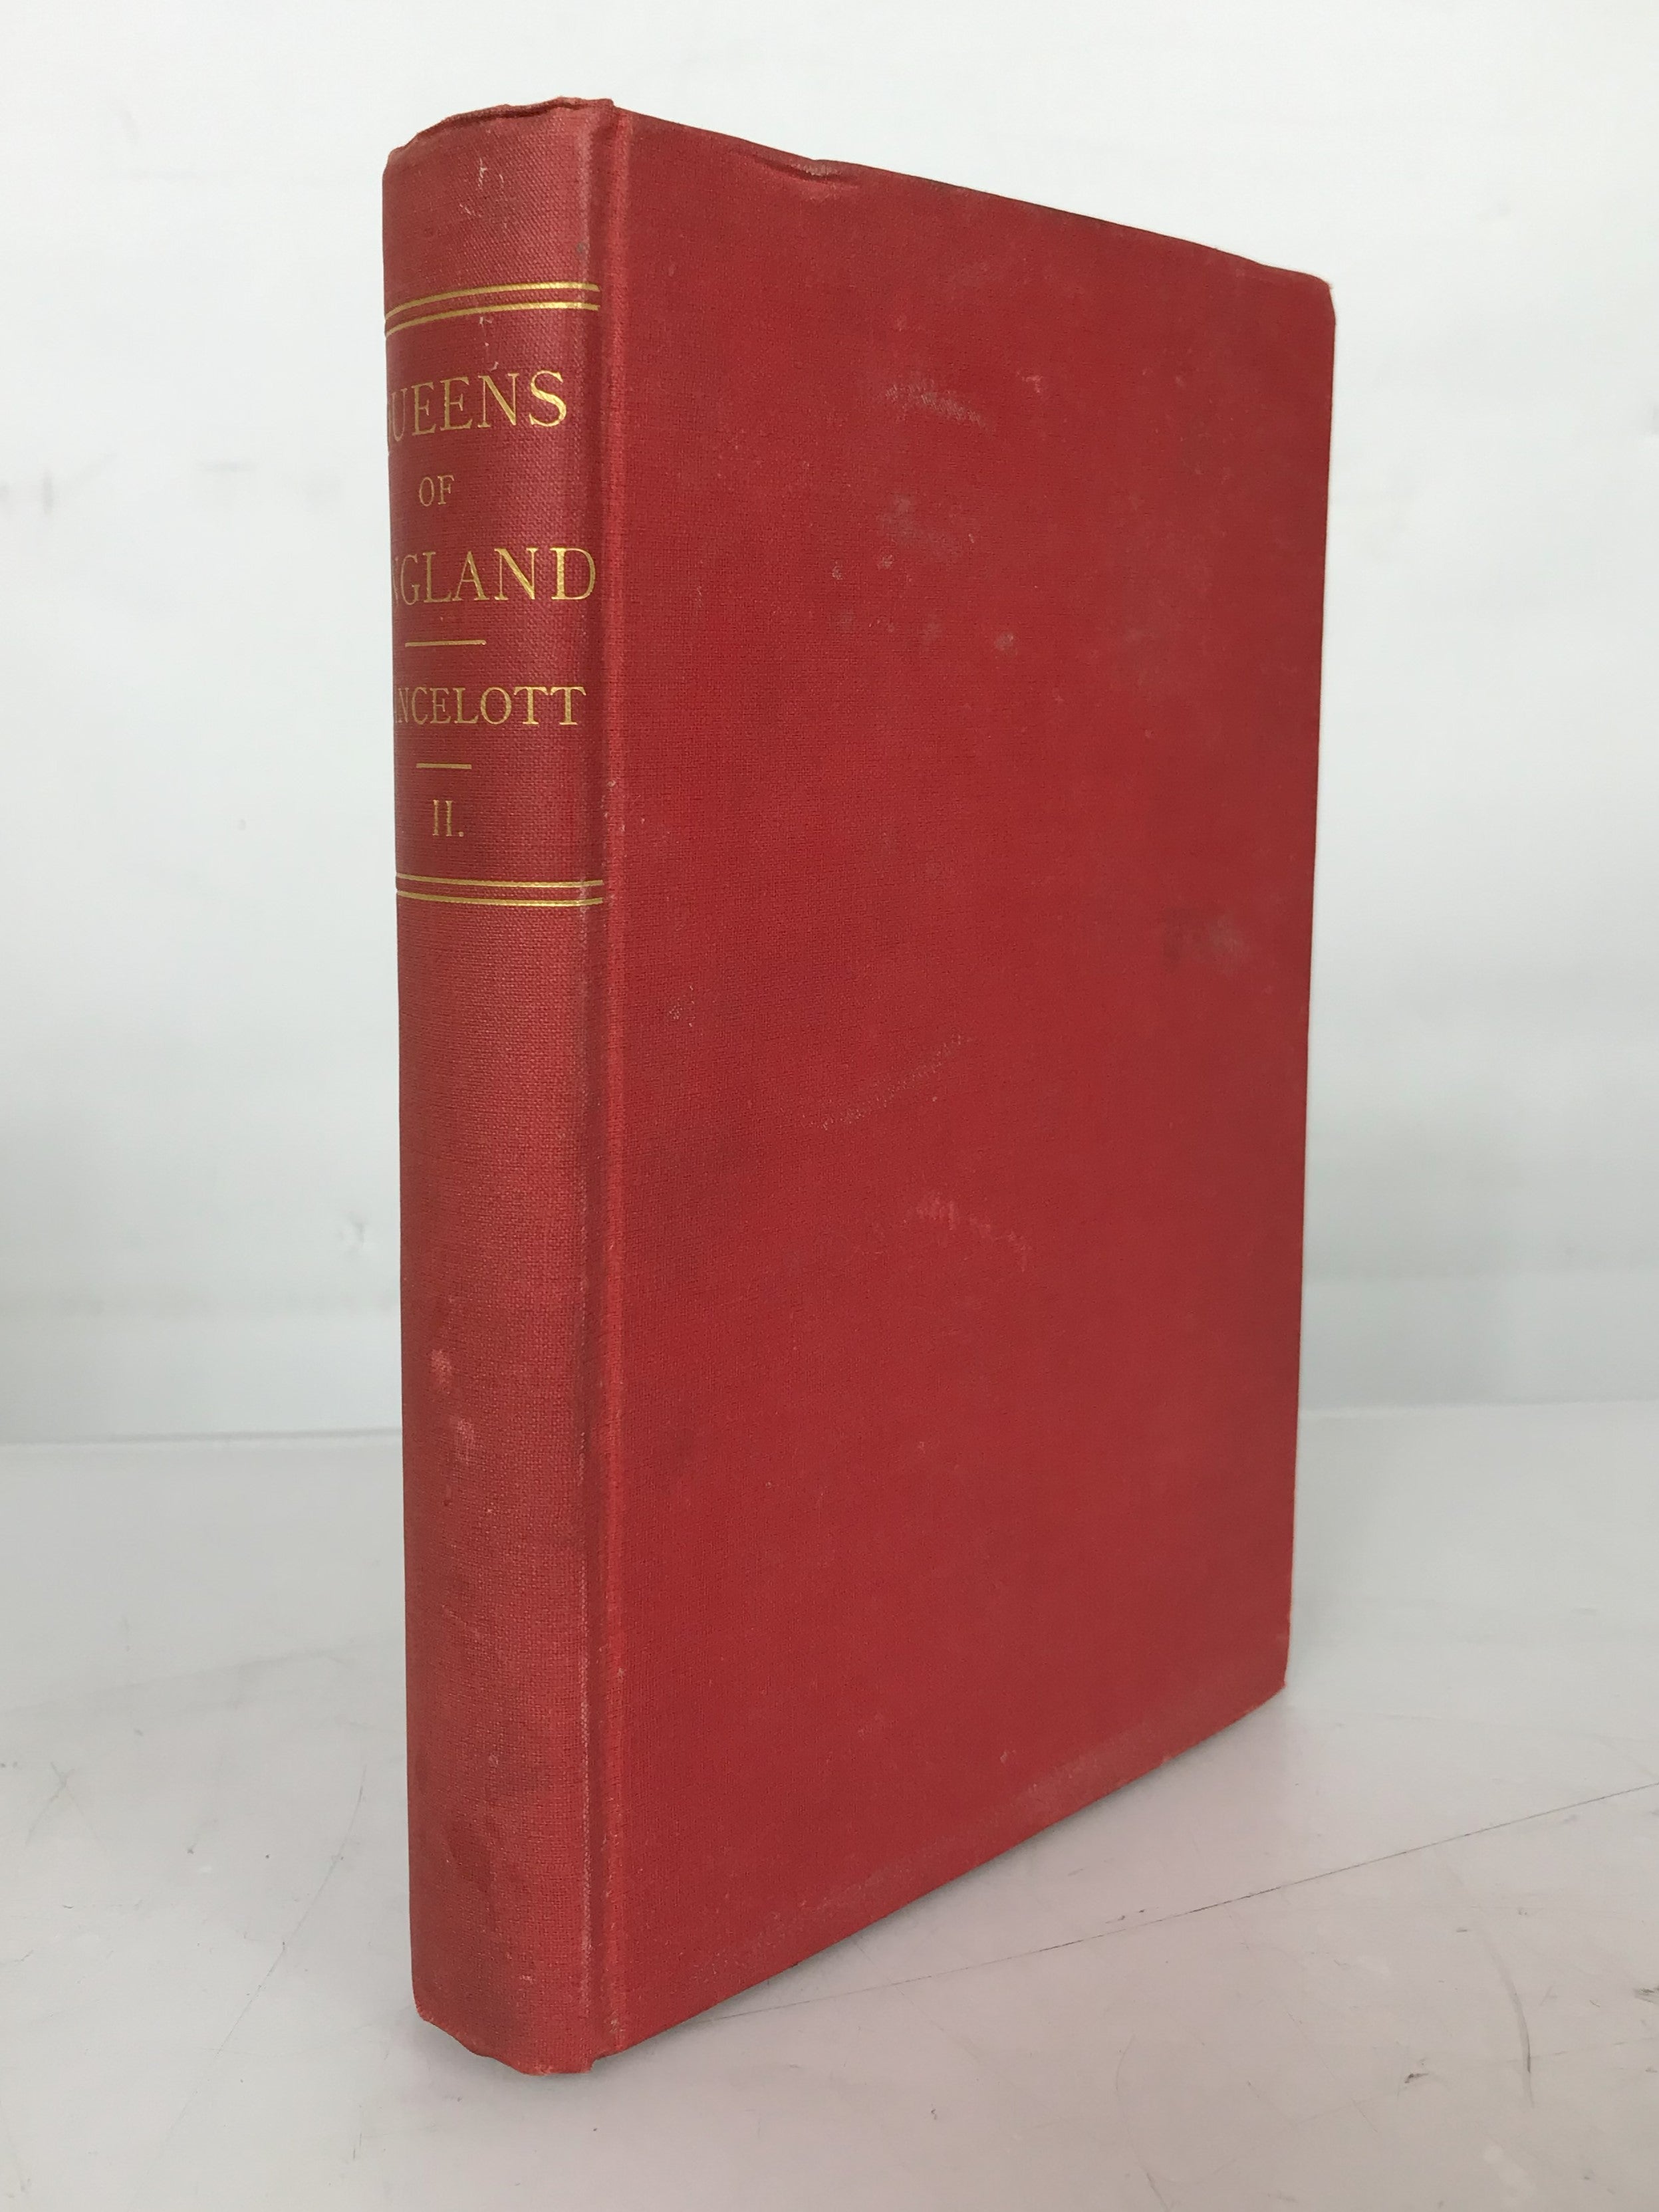 The Queens of England and Their Times by Francis Lancelott Vol 1-2 1895 HC